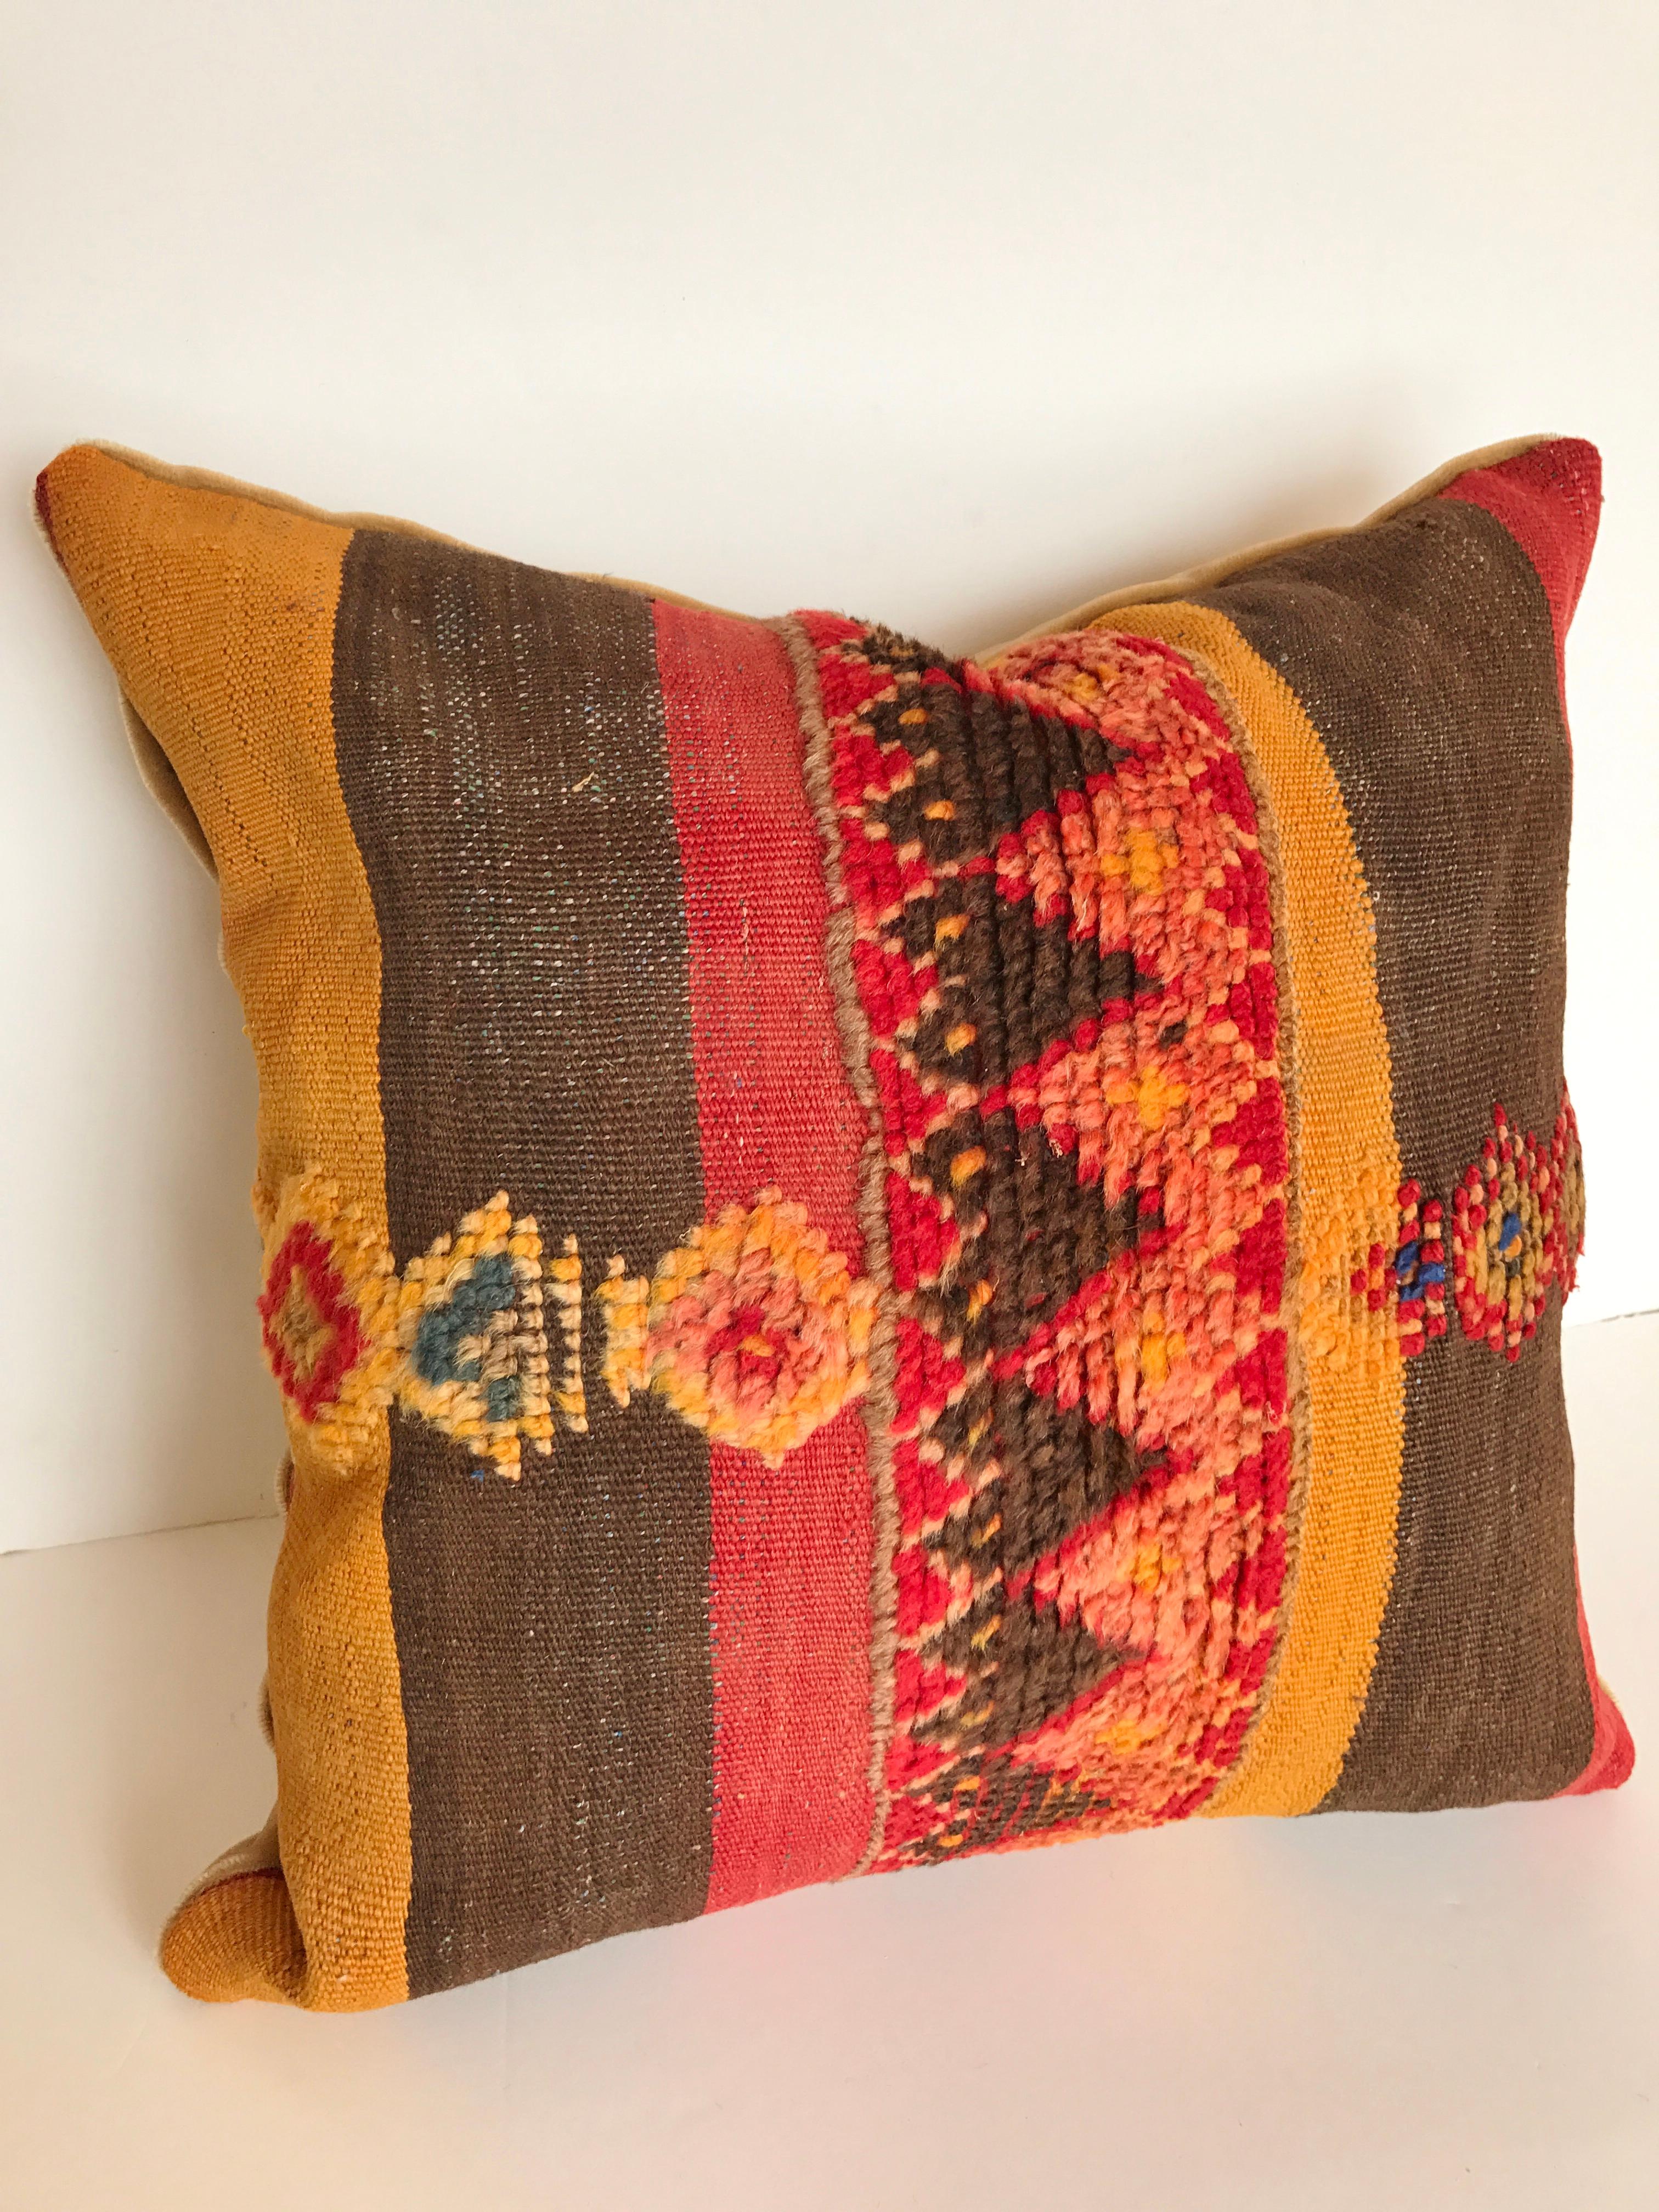 Custom pillow cut from a vintage hand loomed wool Moroccan Berber rug from the Atlas Mountains. Colorful stripes are embellished with tufted tribal designs. Pillow is backed in mohair, filled with an insert of 50/50 down and feathers and hand sewn